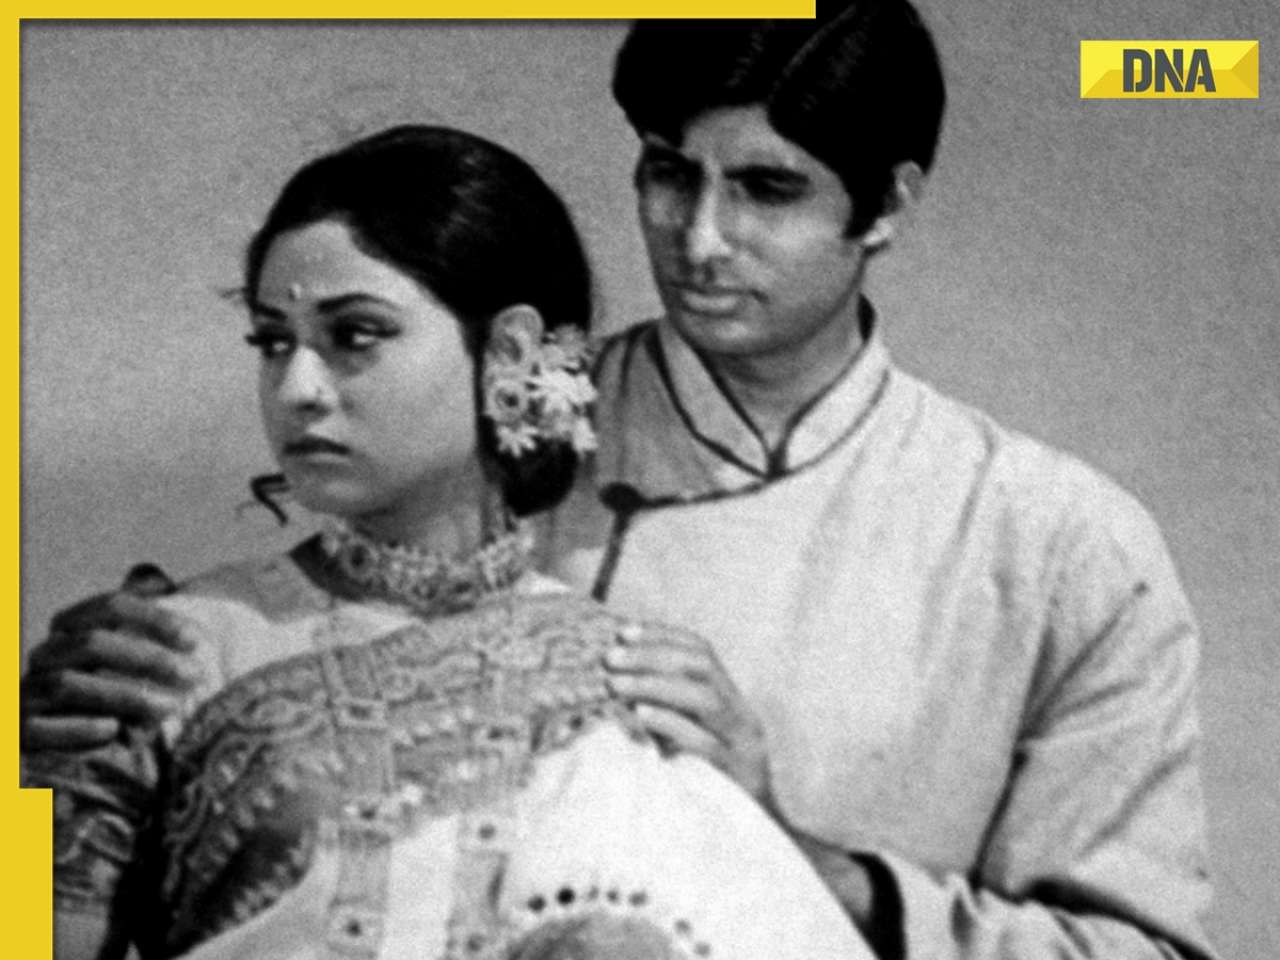 Not Zanjeer or Abhimaan, the first film in which Amitabh Bachchan and Jaya Bachchan were paired together was...